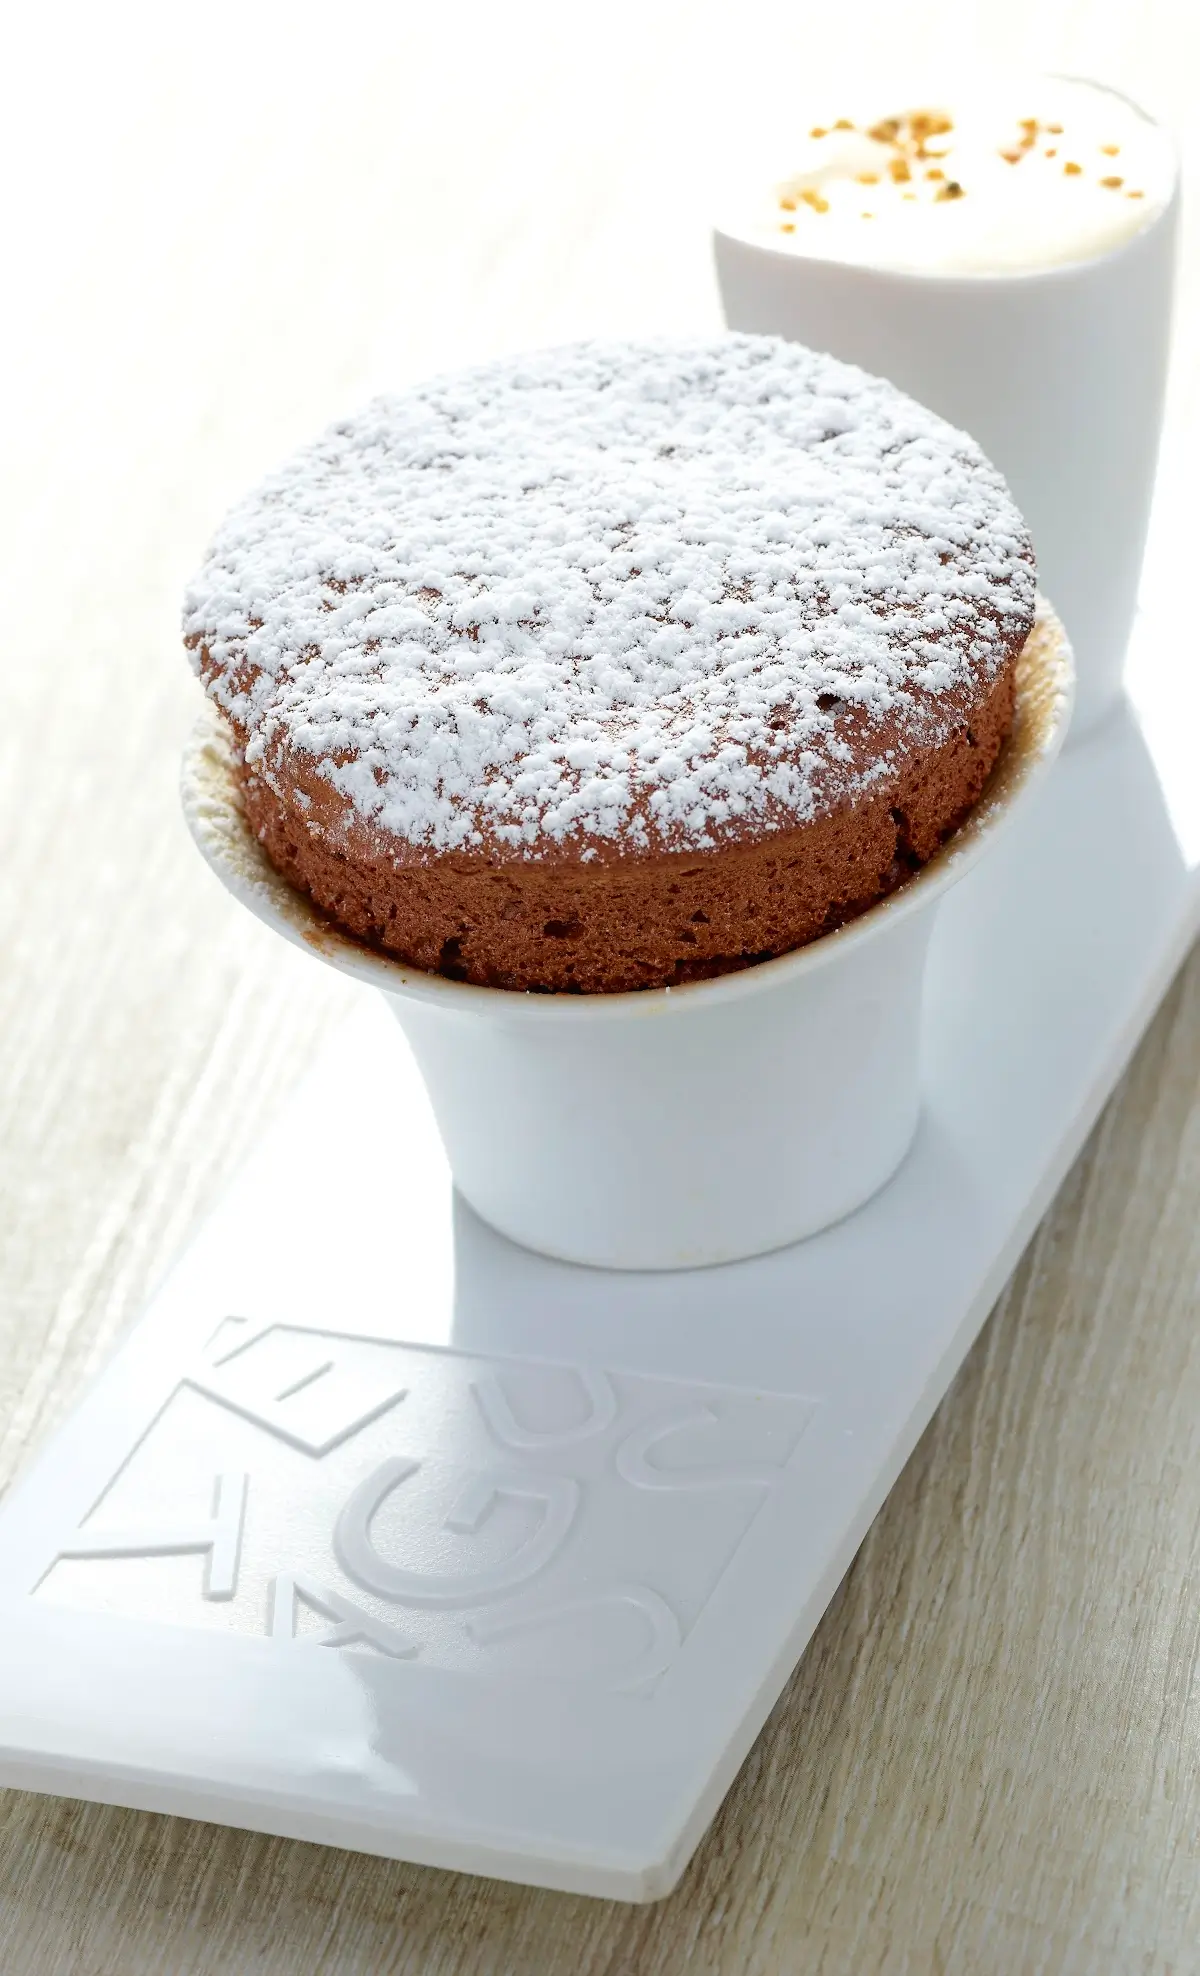 Chocolate soufflé dusted with powdered sugar at Auguste, a Michelin Star restaurant in Paris."